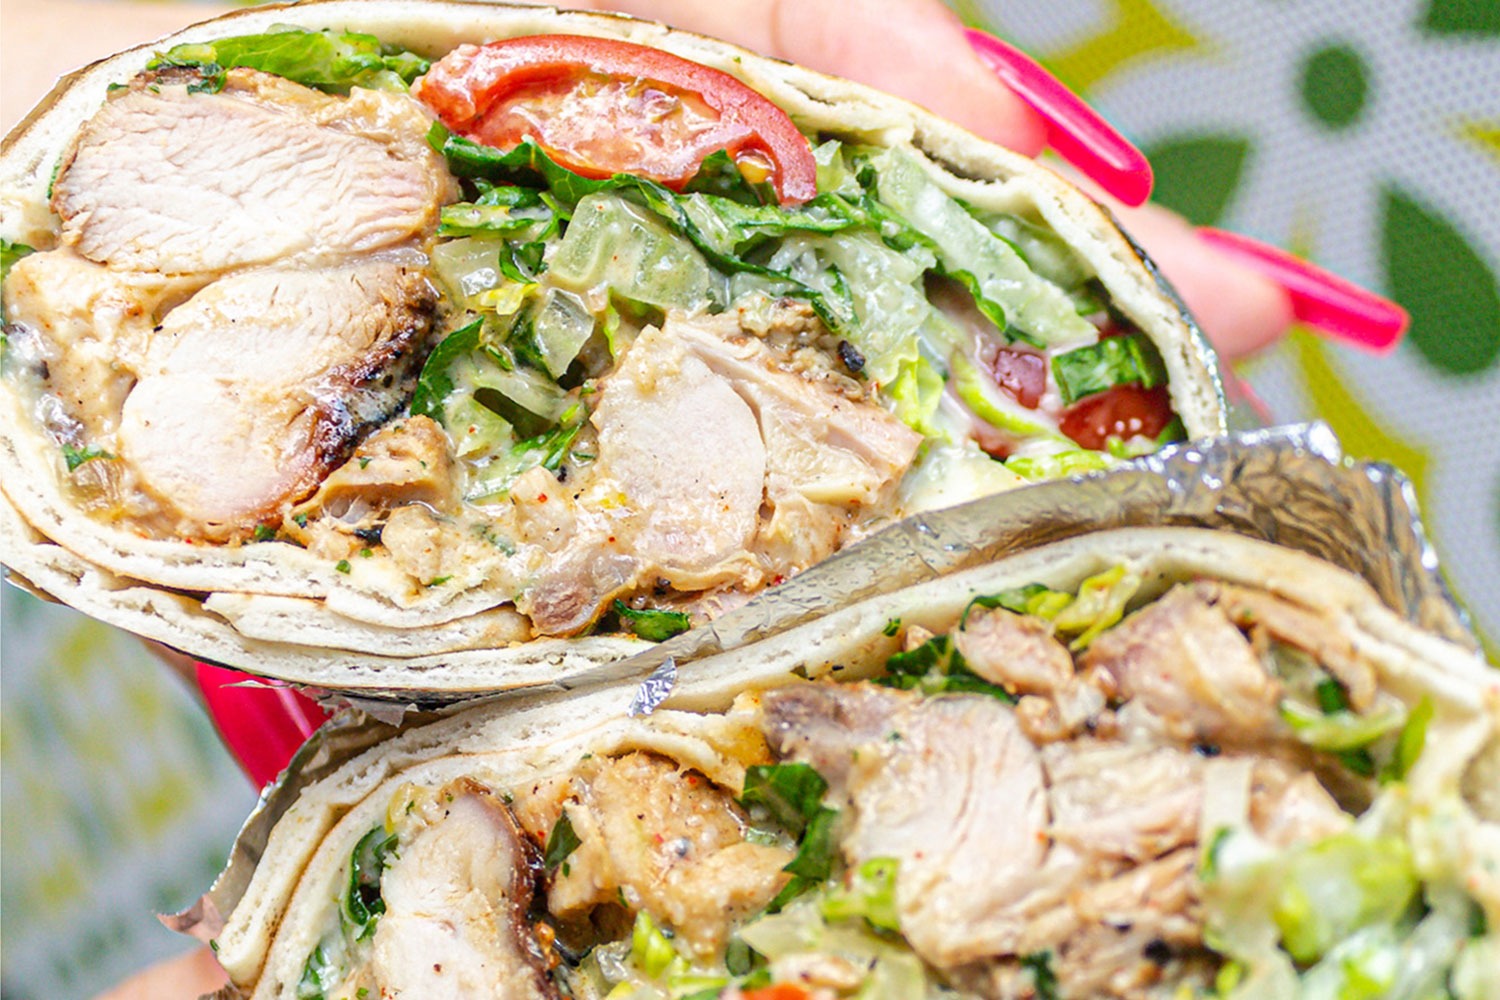 The cross section of a chicken wrap from Imee's Kitchen